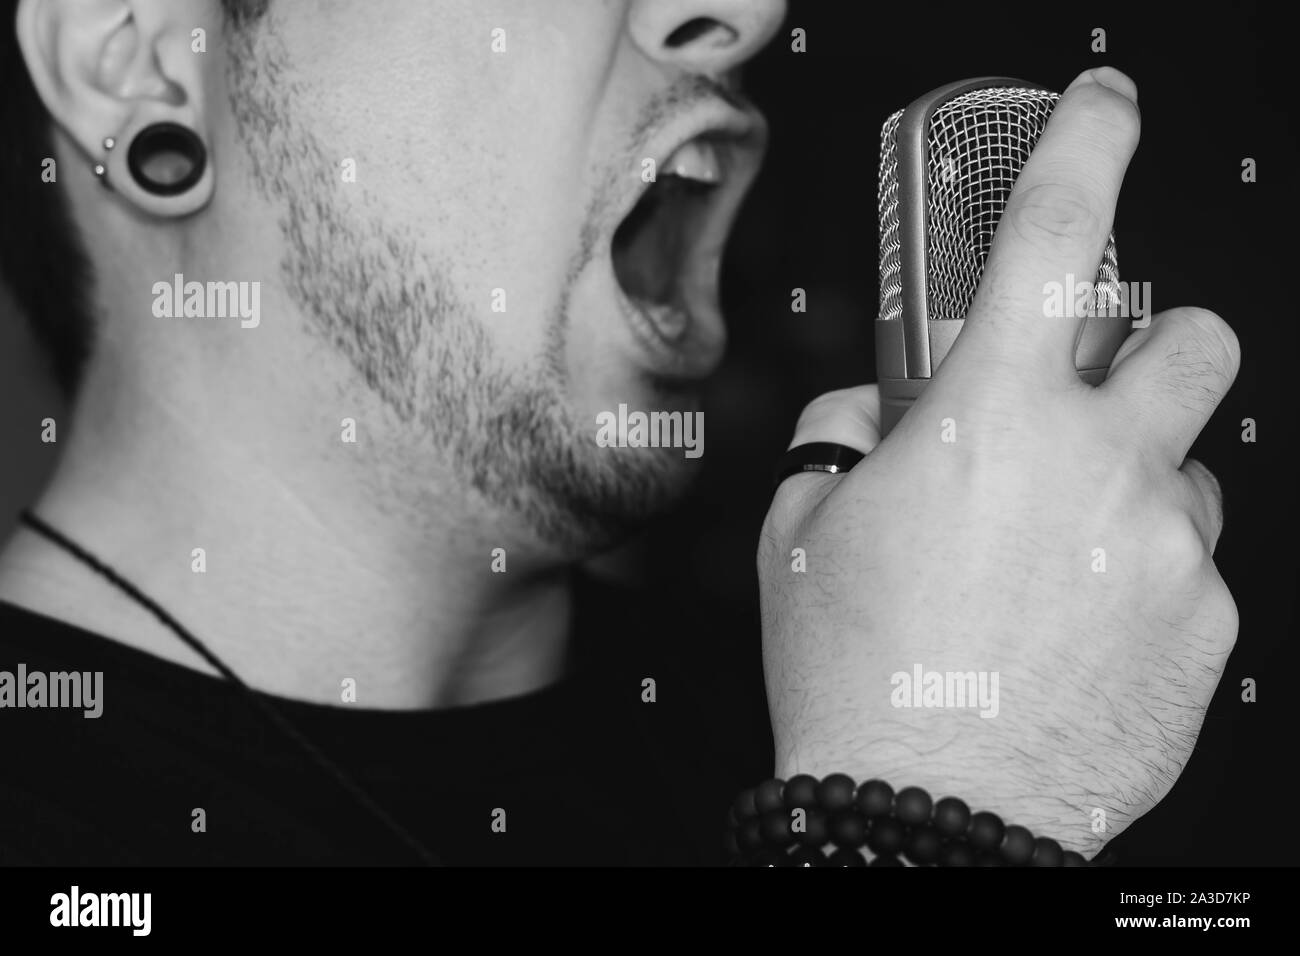 Man screaming on the microphone. Singing heavy metal. Close-up on a man wearing black, holding a studio microphone. Stock Photo